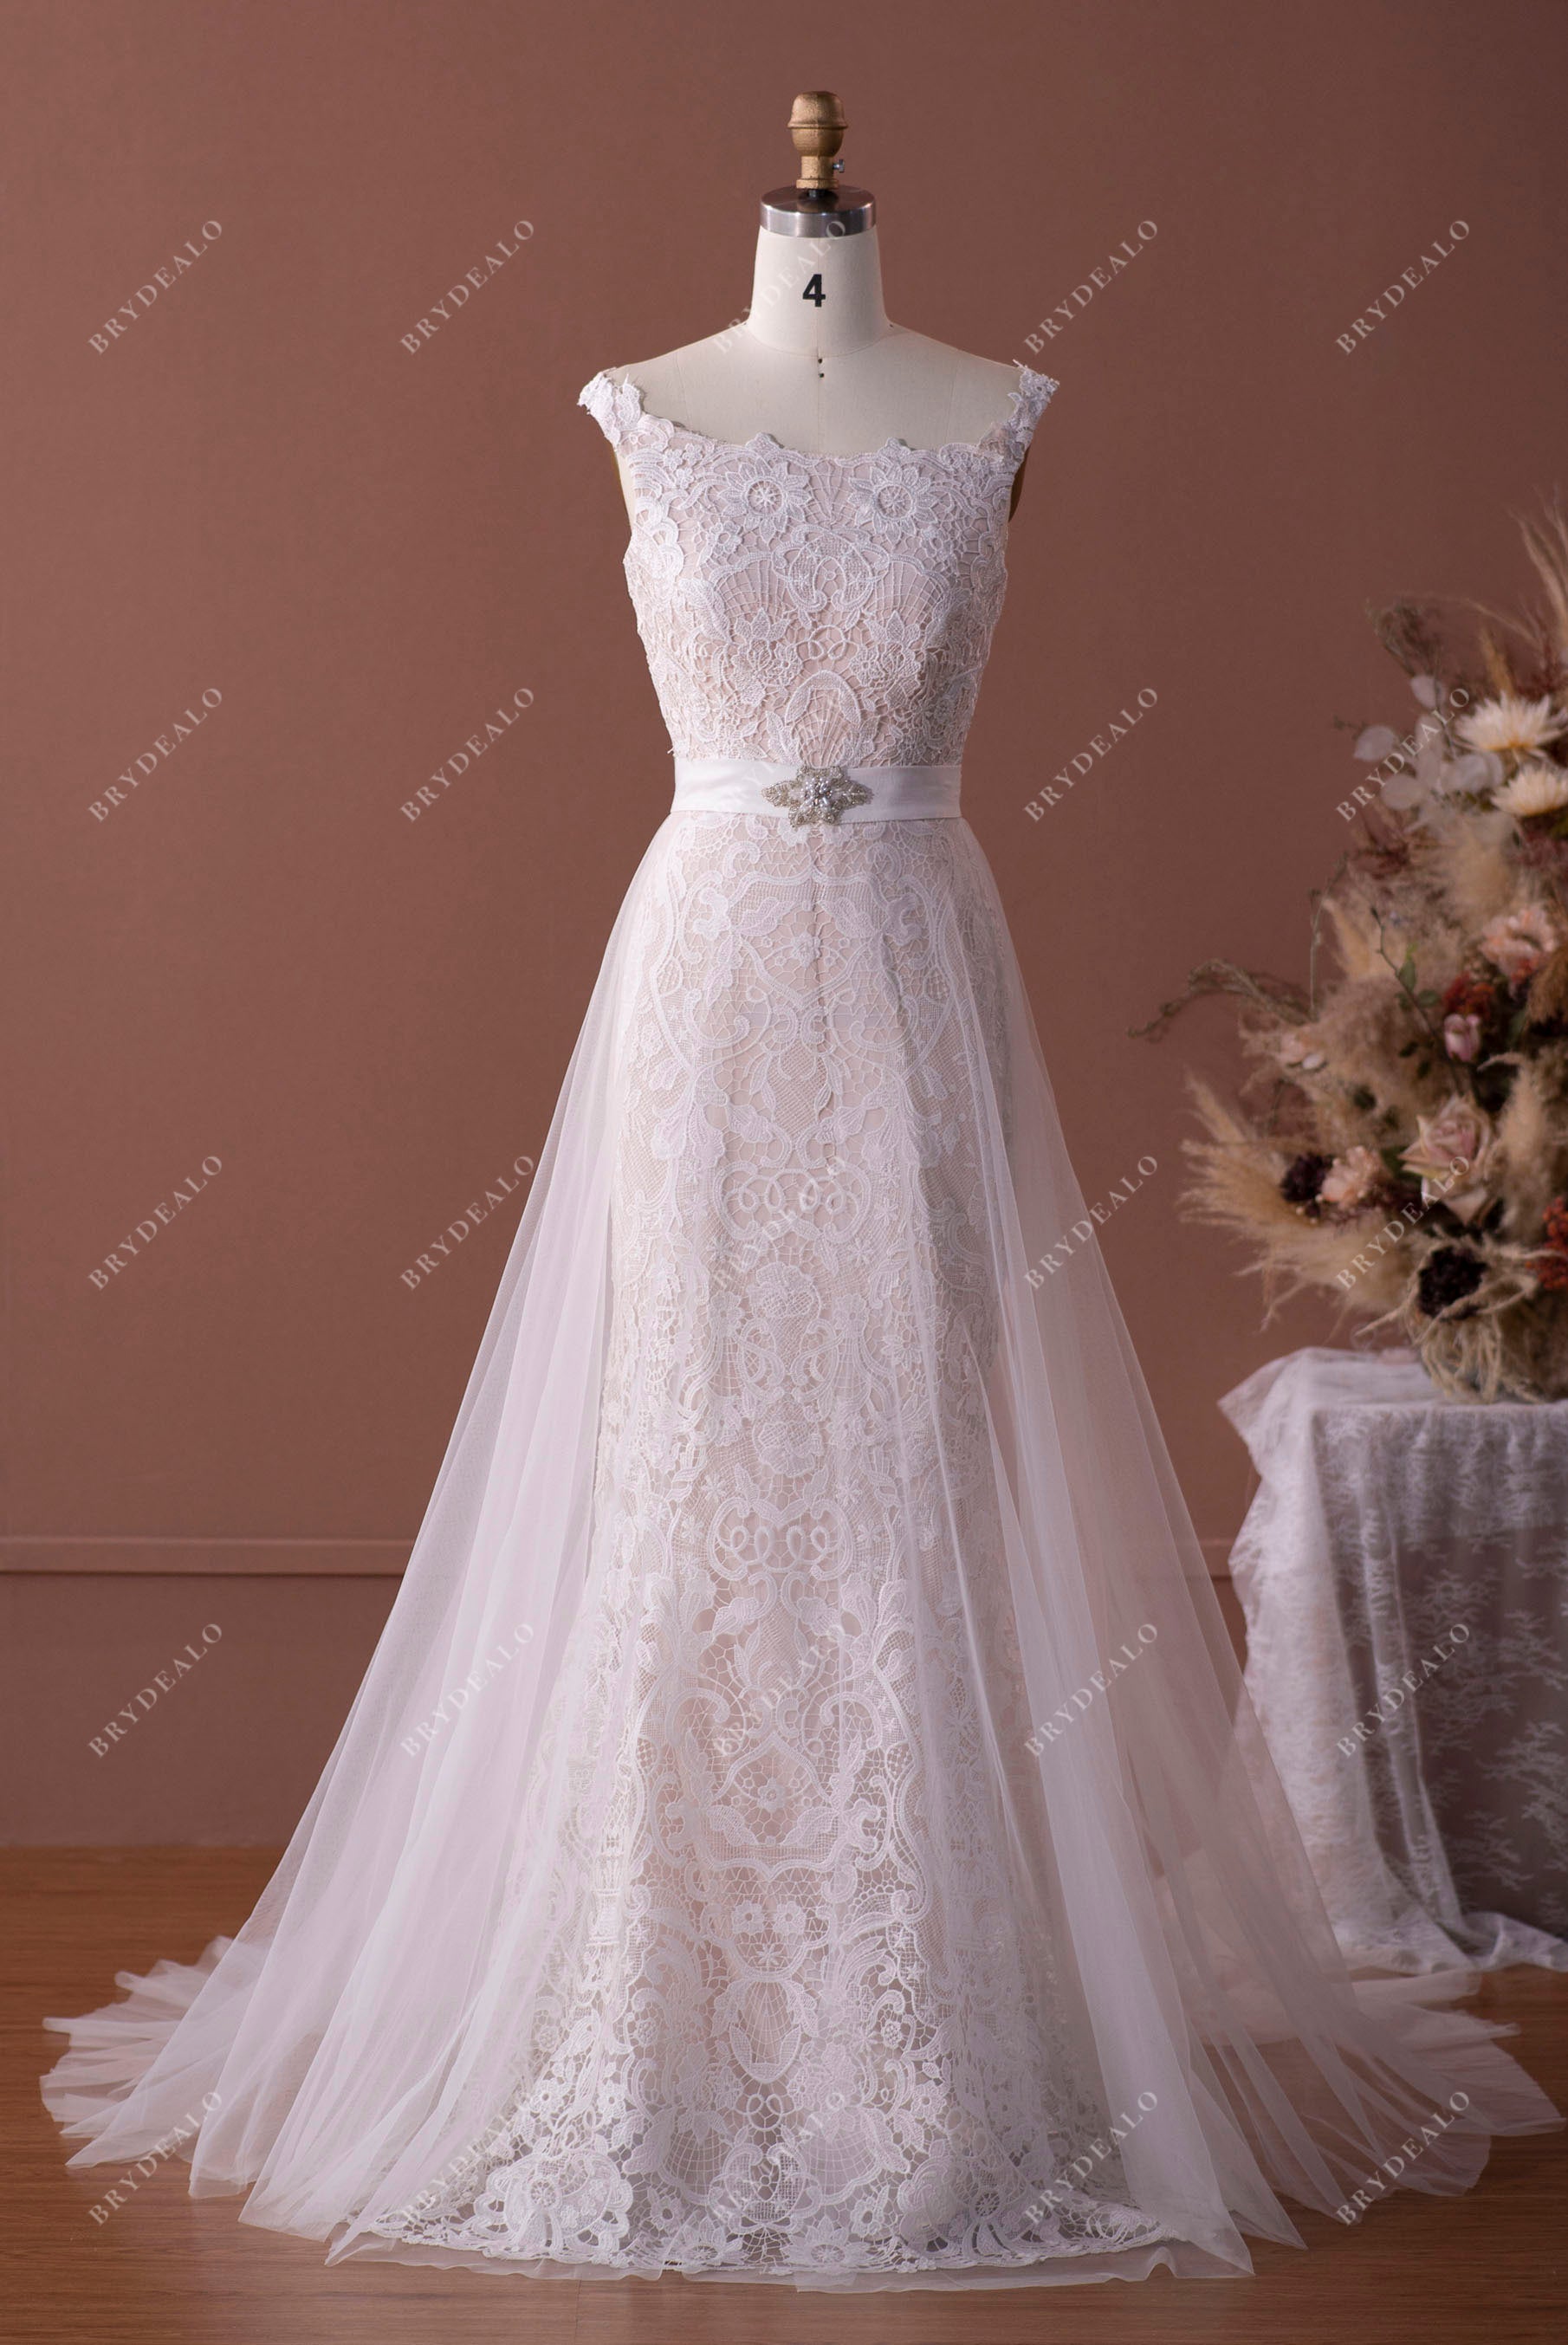 Mordern Lace Mermaid Wedding Dress with Tulle Overskirt